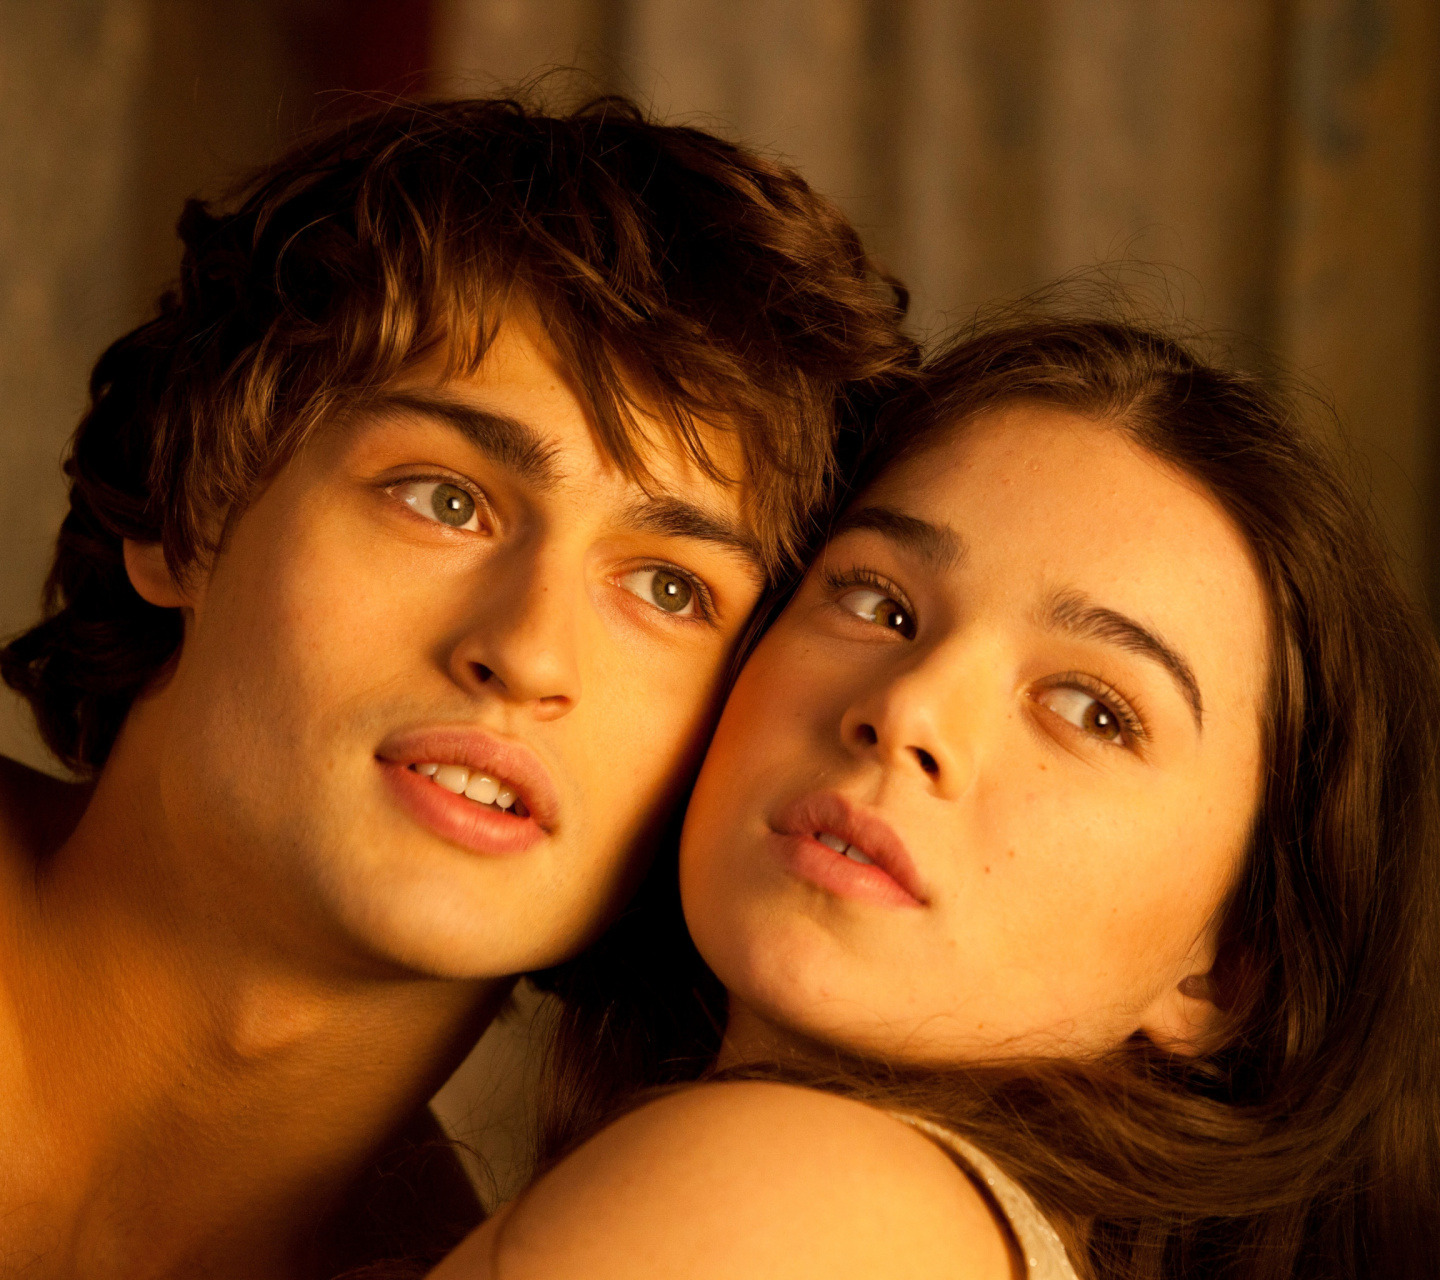 Romeo and Juliet with Hailee Steinfeld and Douglas Booth screenshot #1 1440x1280